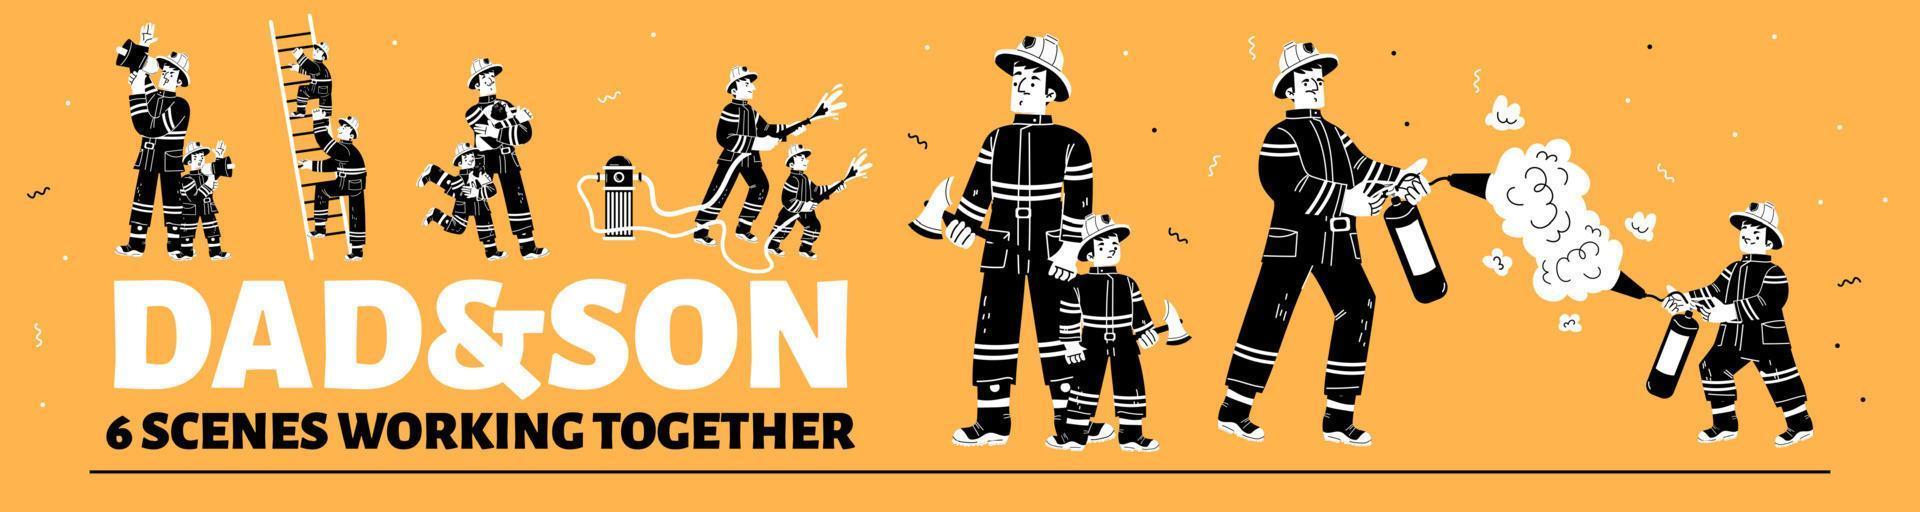 Dad and son characters in fireman costume vector